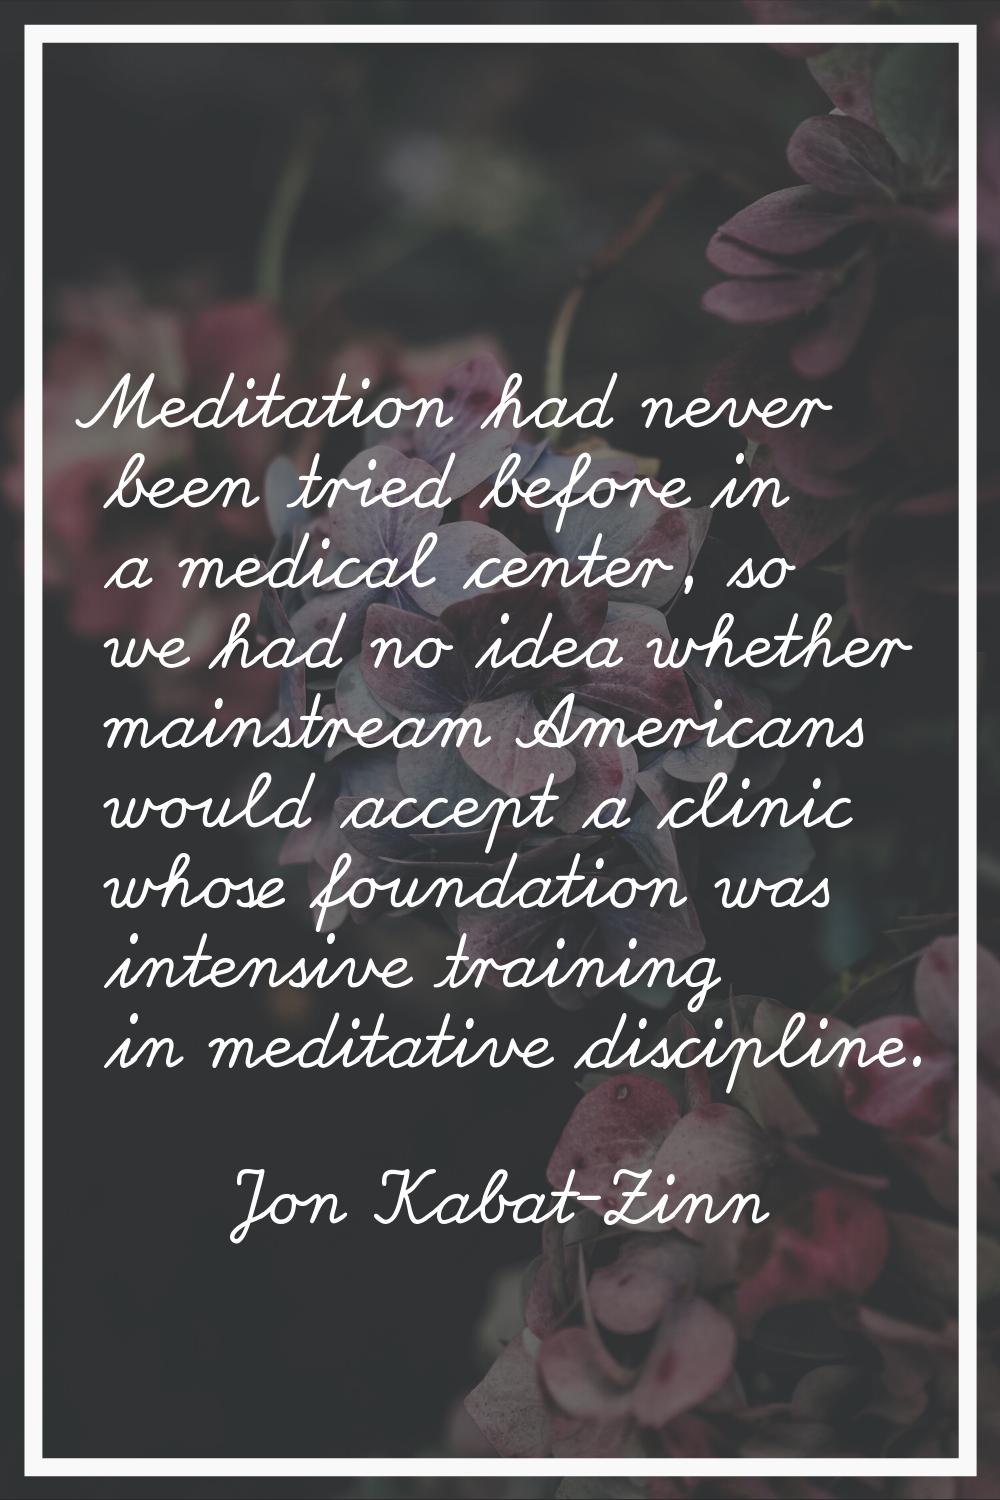 Meditation had never been tried before in a medical center, so we had no idea whether mainstream Am